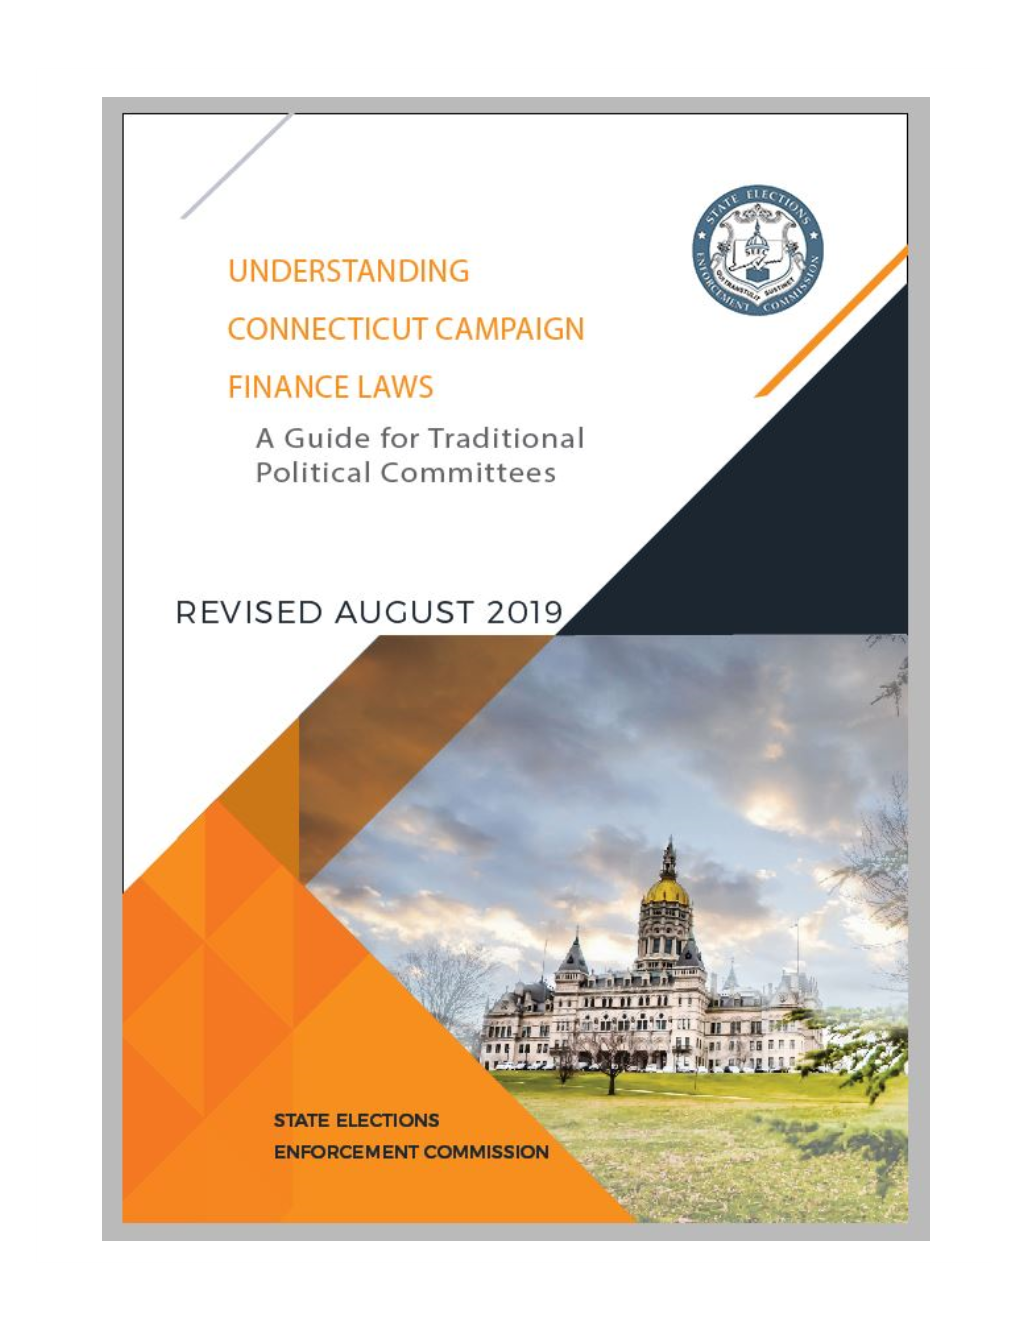 Traditional Political Committee Guide